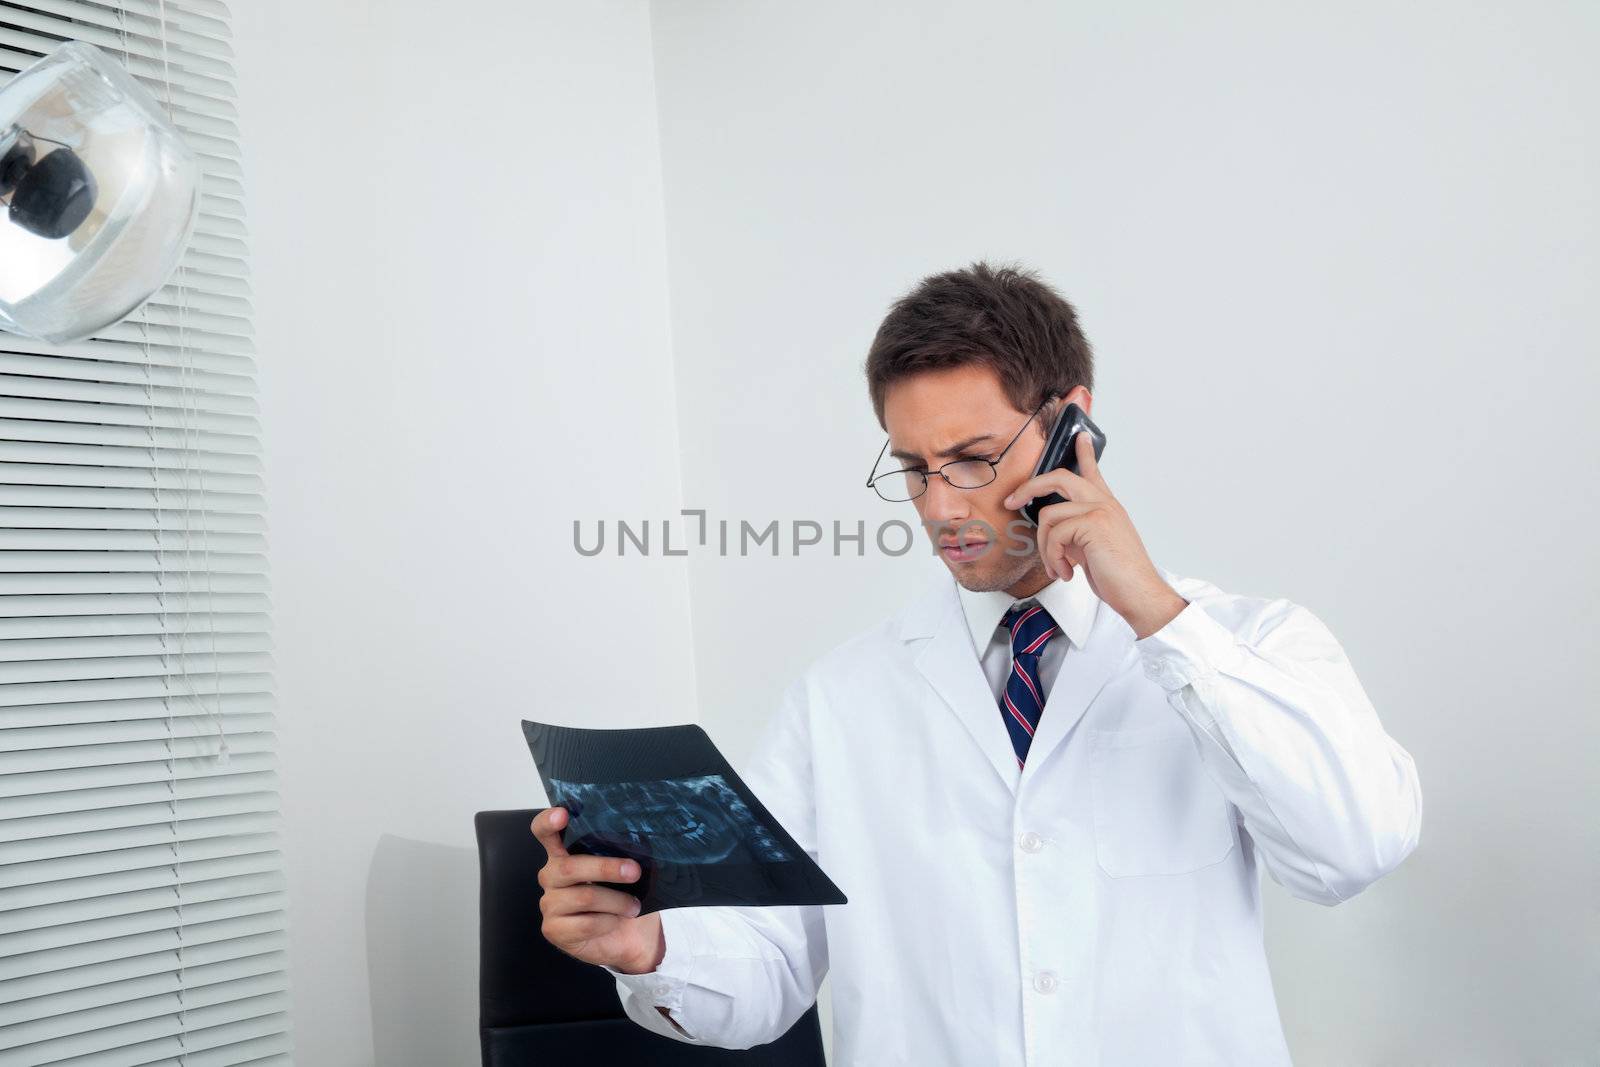 Young male dentist looking at X-ray report while using cellphone in clinic